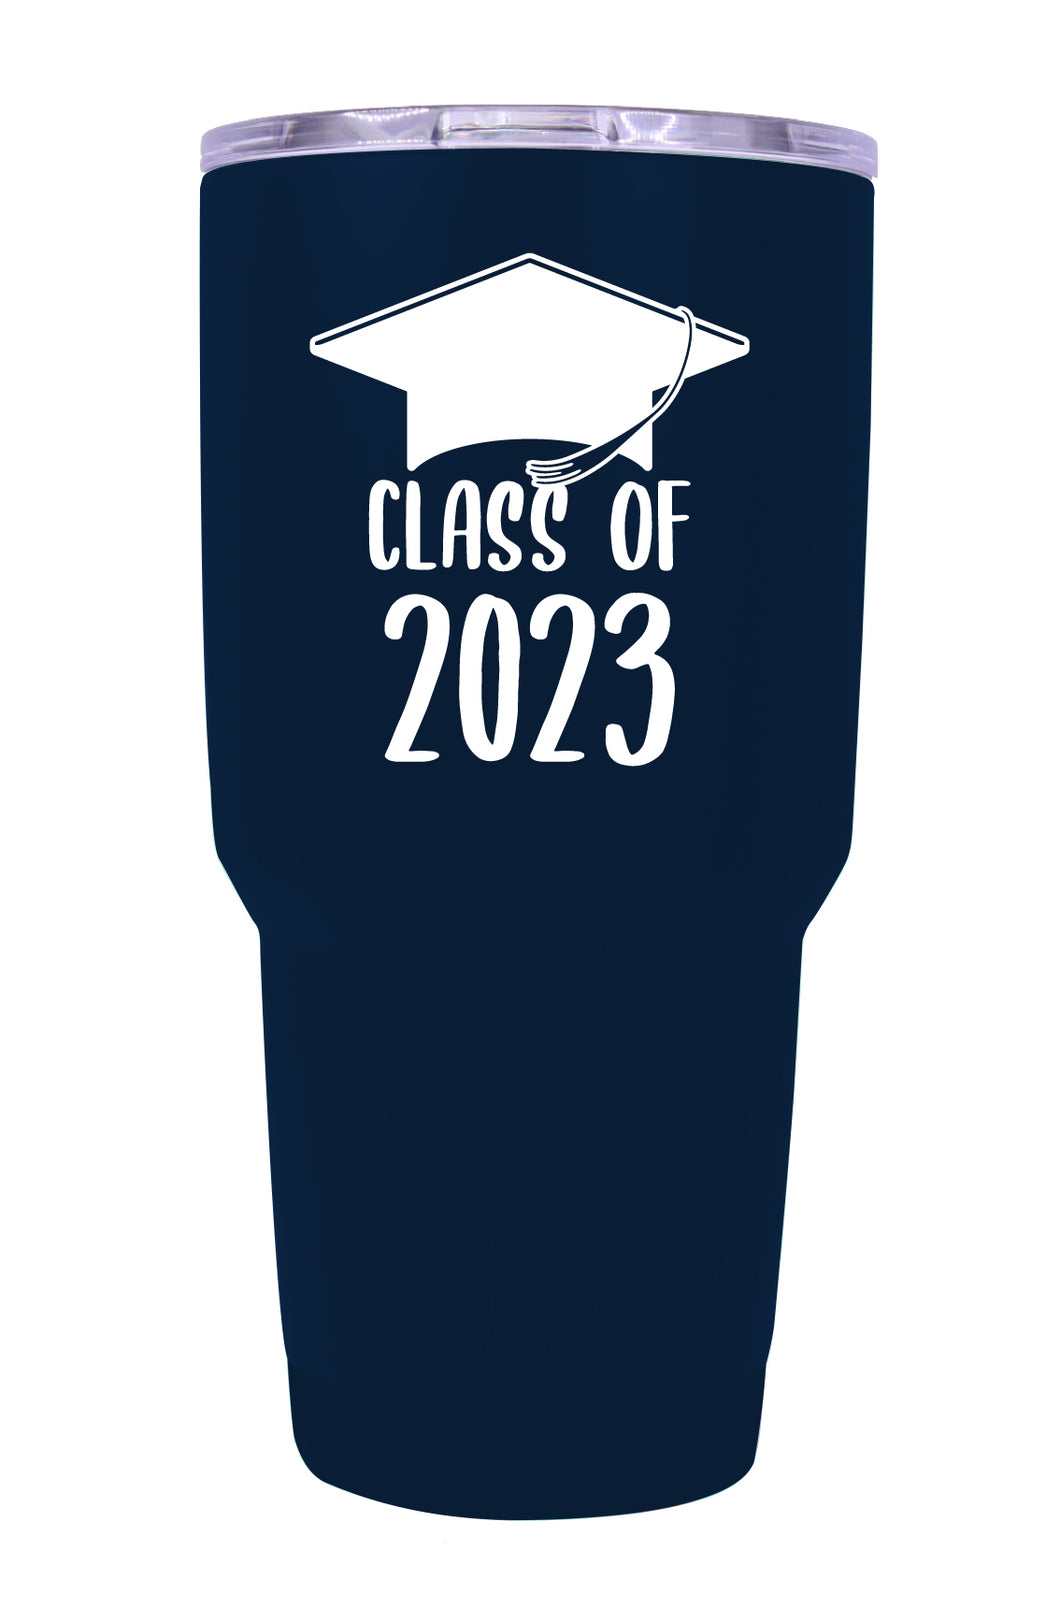 Class of 2023 Graduation 24 oz Insulated Stainless Steel Tumbler Navy